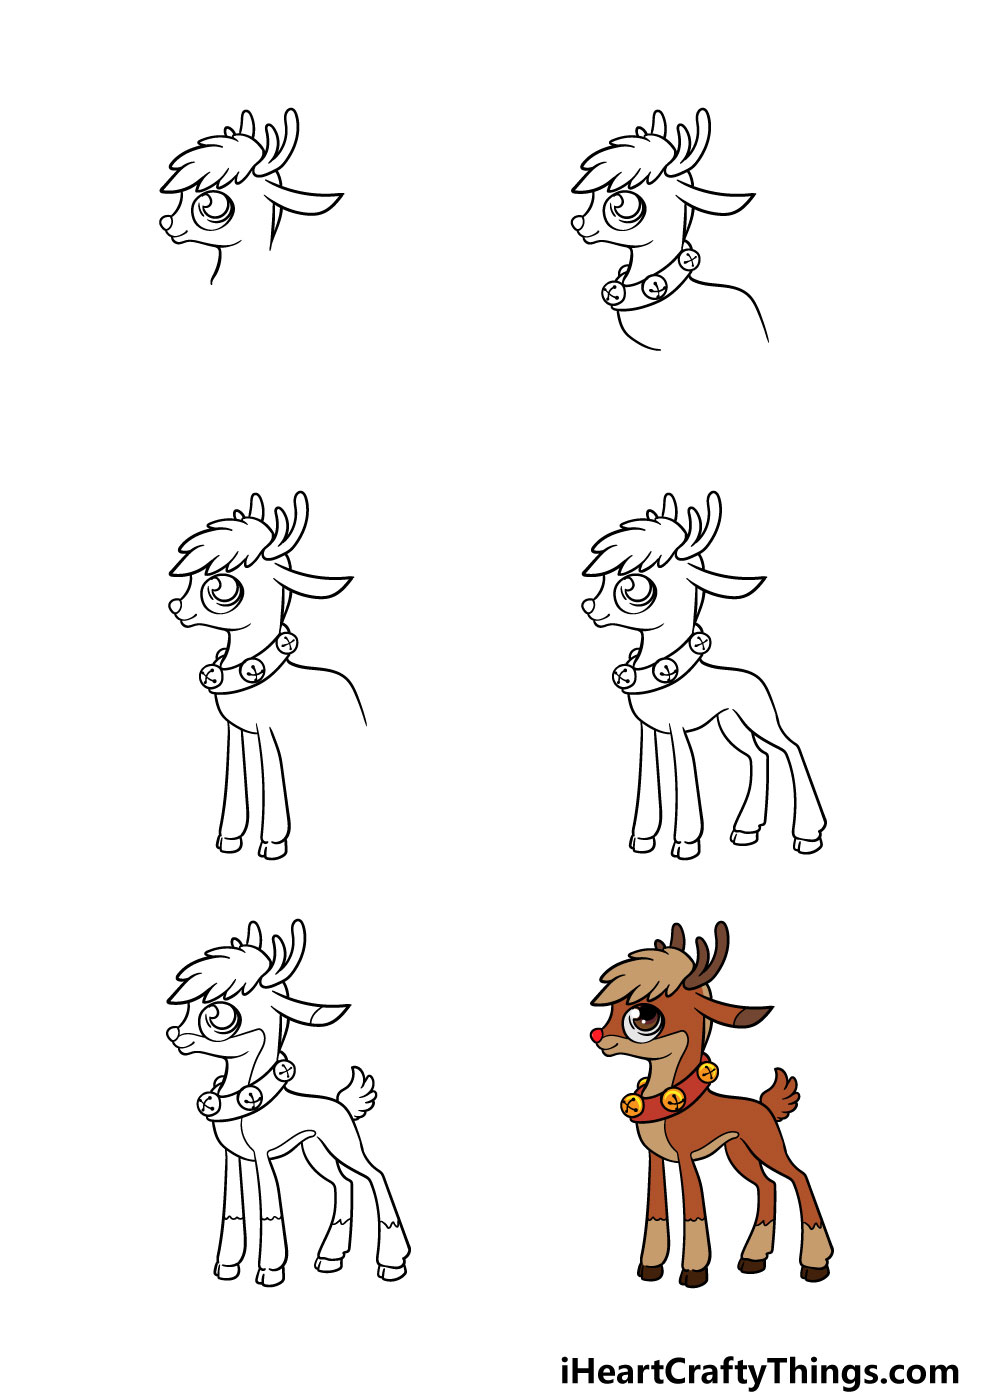 how to draw Rudolph in 6 steps